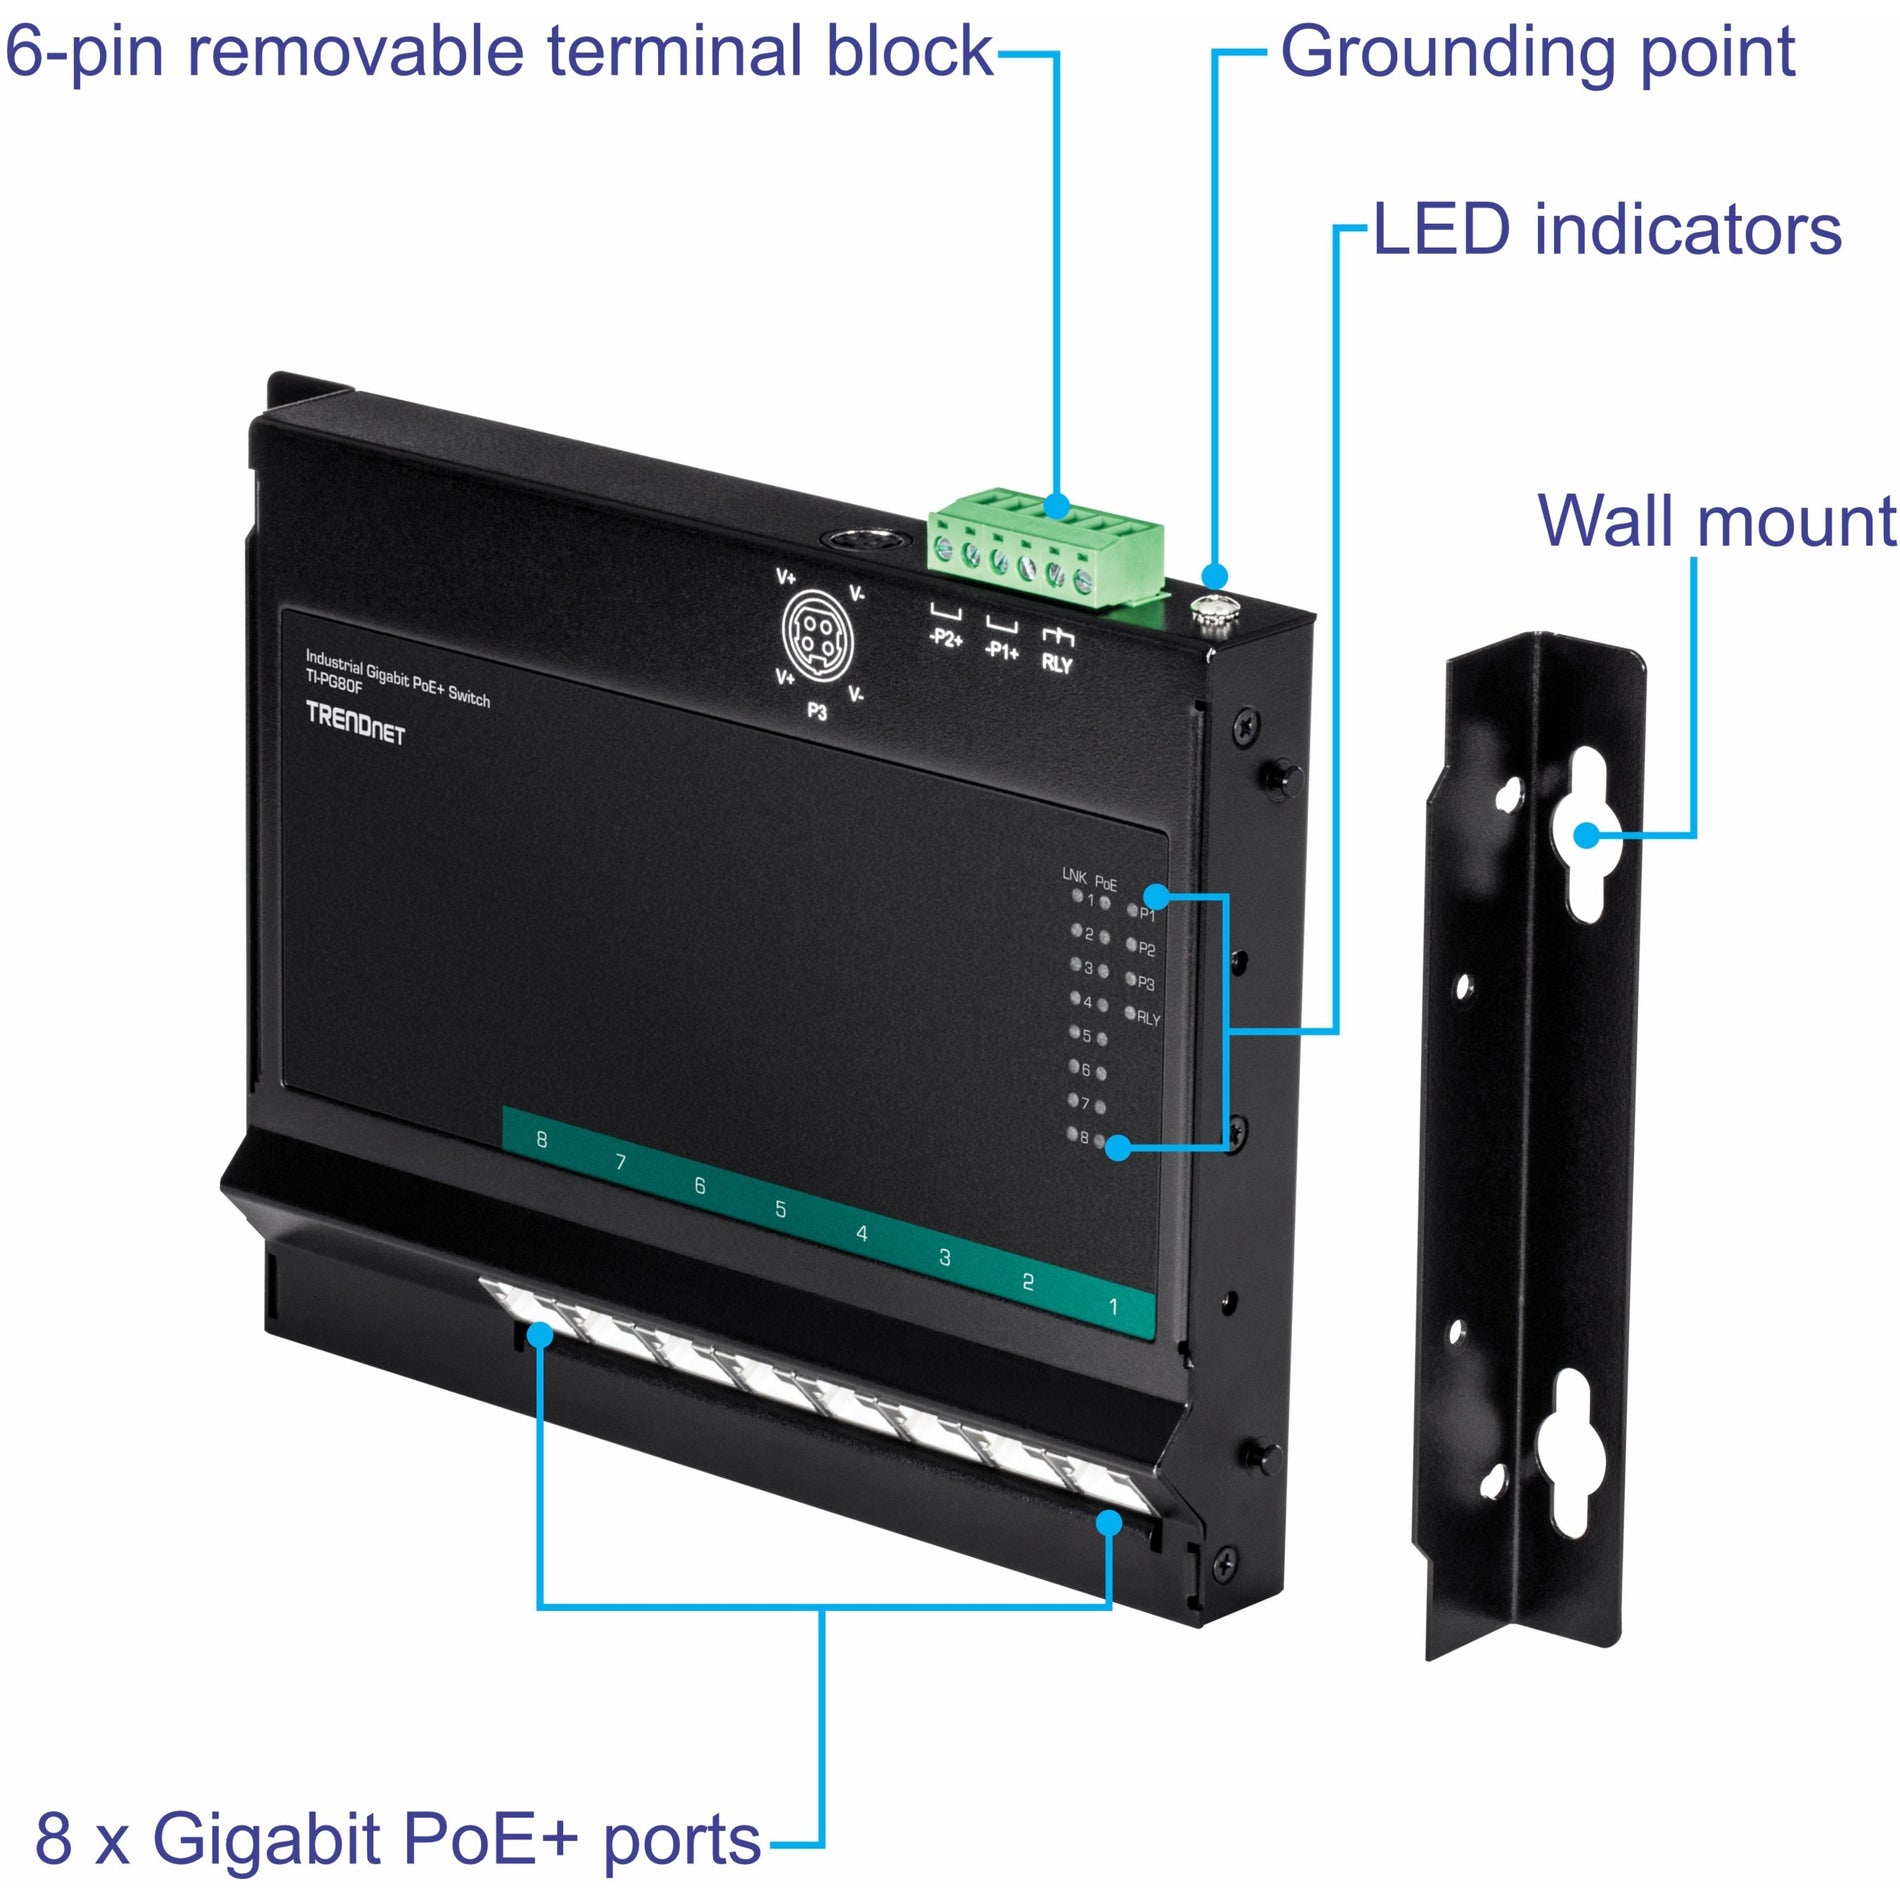 TRENDnet 8-Port Industrial Gigabit Poe+ Wall-Mounted Front Access Switch; 8X Gigabit Poe+ Ports; DIN-Rail Mount; 48 ?57V DC Power Input; IP30; 200W Poe Budget;Lifetime Protection; TI-PG80F (TI-PG80F) Alternate-Image7 image